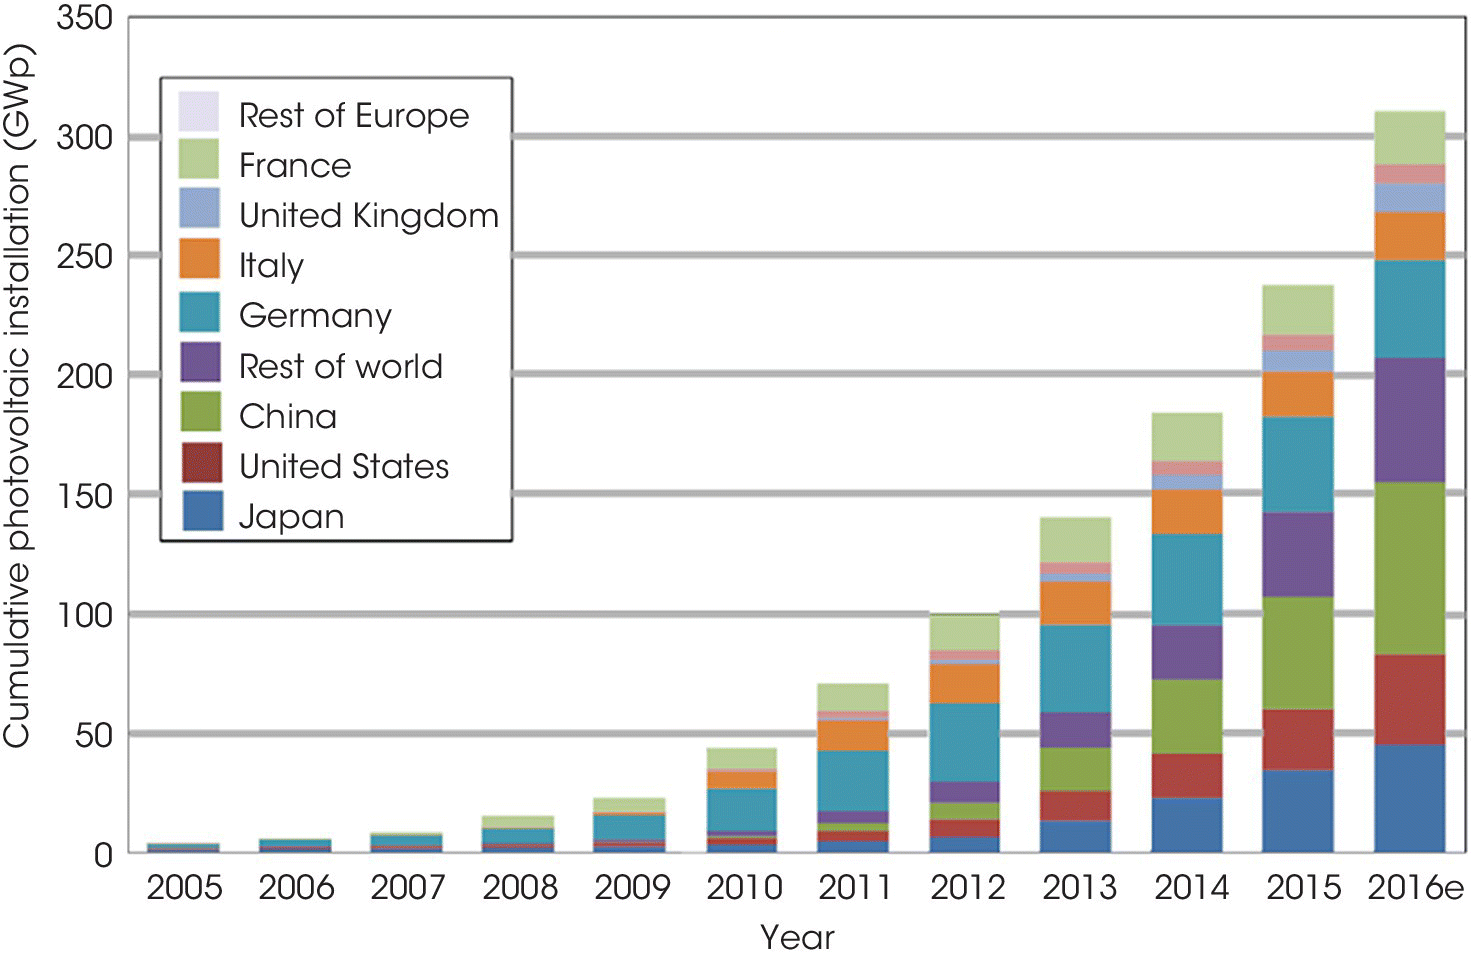 Stacked bar graph of cumulative photovoltaic of Japan, United States, China, Rest of world, Germany, Italy, United Kingdom, France, and Rest of Europe from 2005 to 2016.